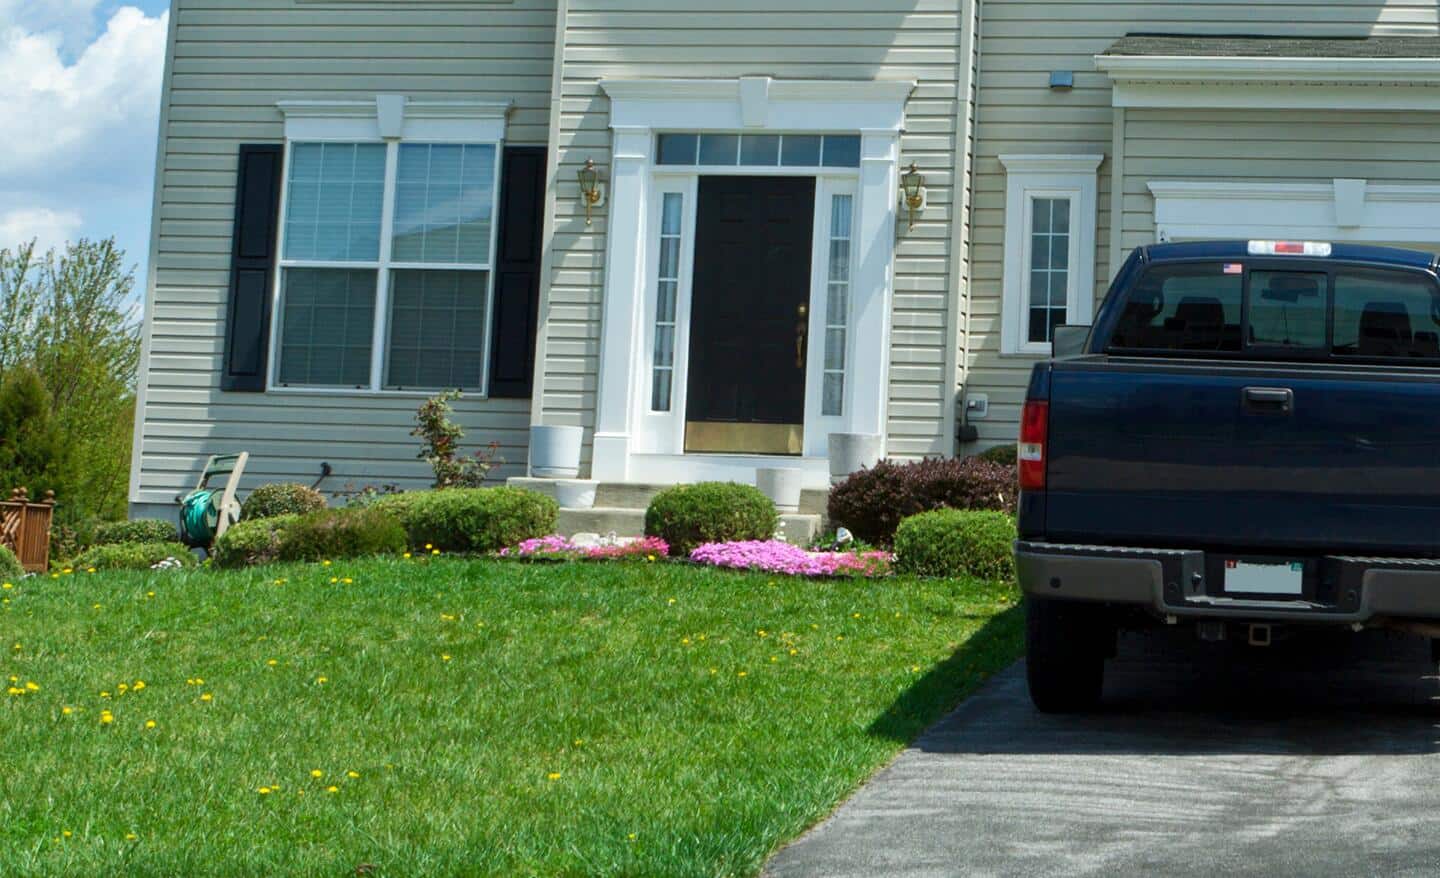 A truck parked on a paved driveway in front of a house.